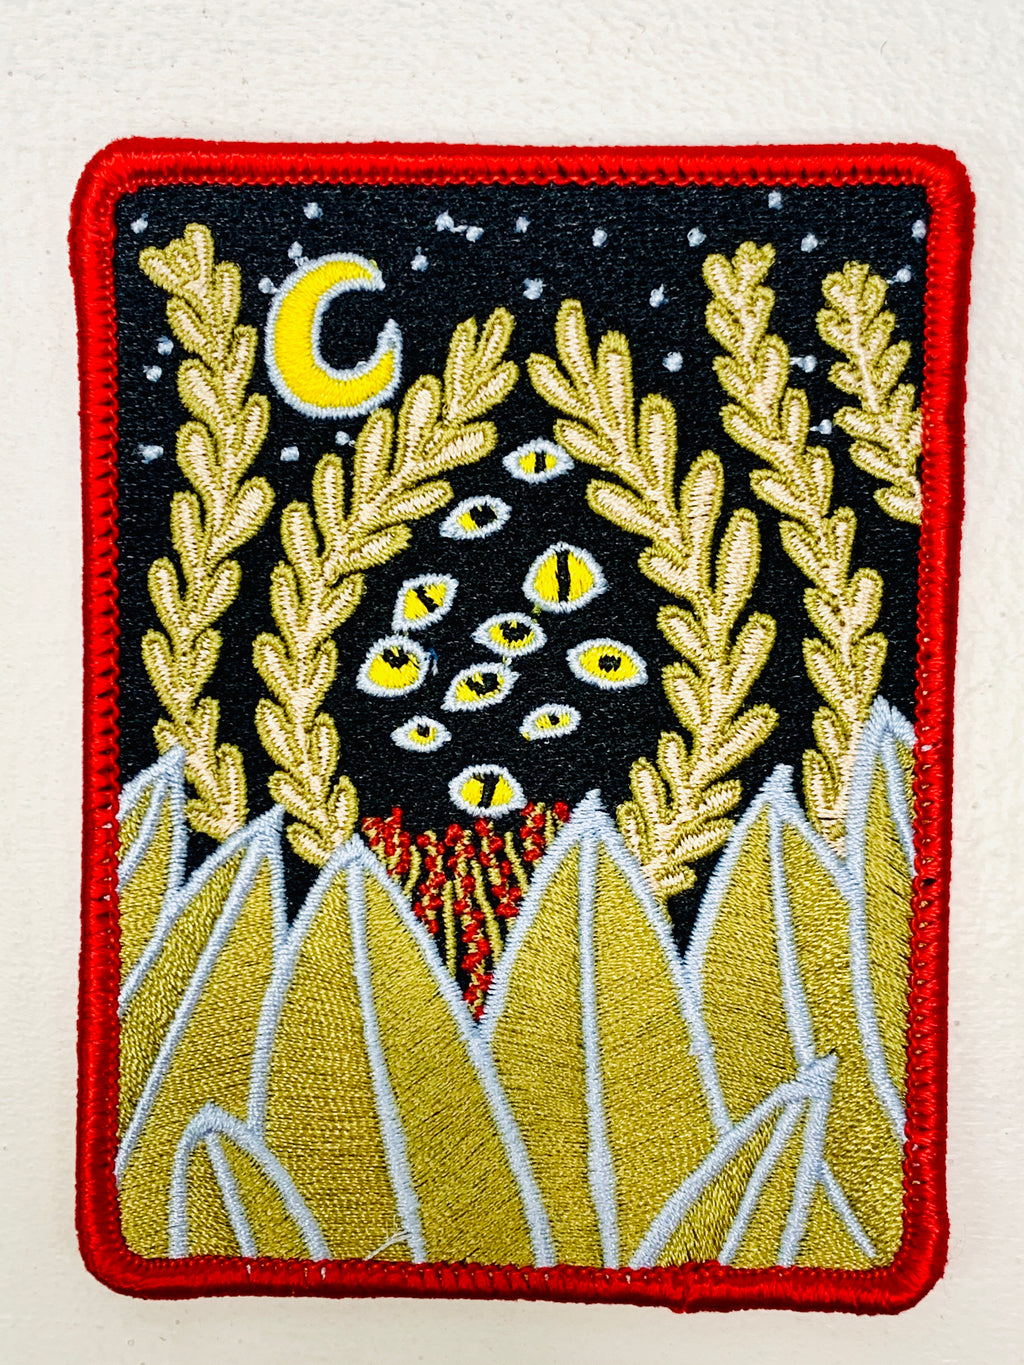 Plants and Eyes Embroidered Patch